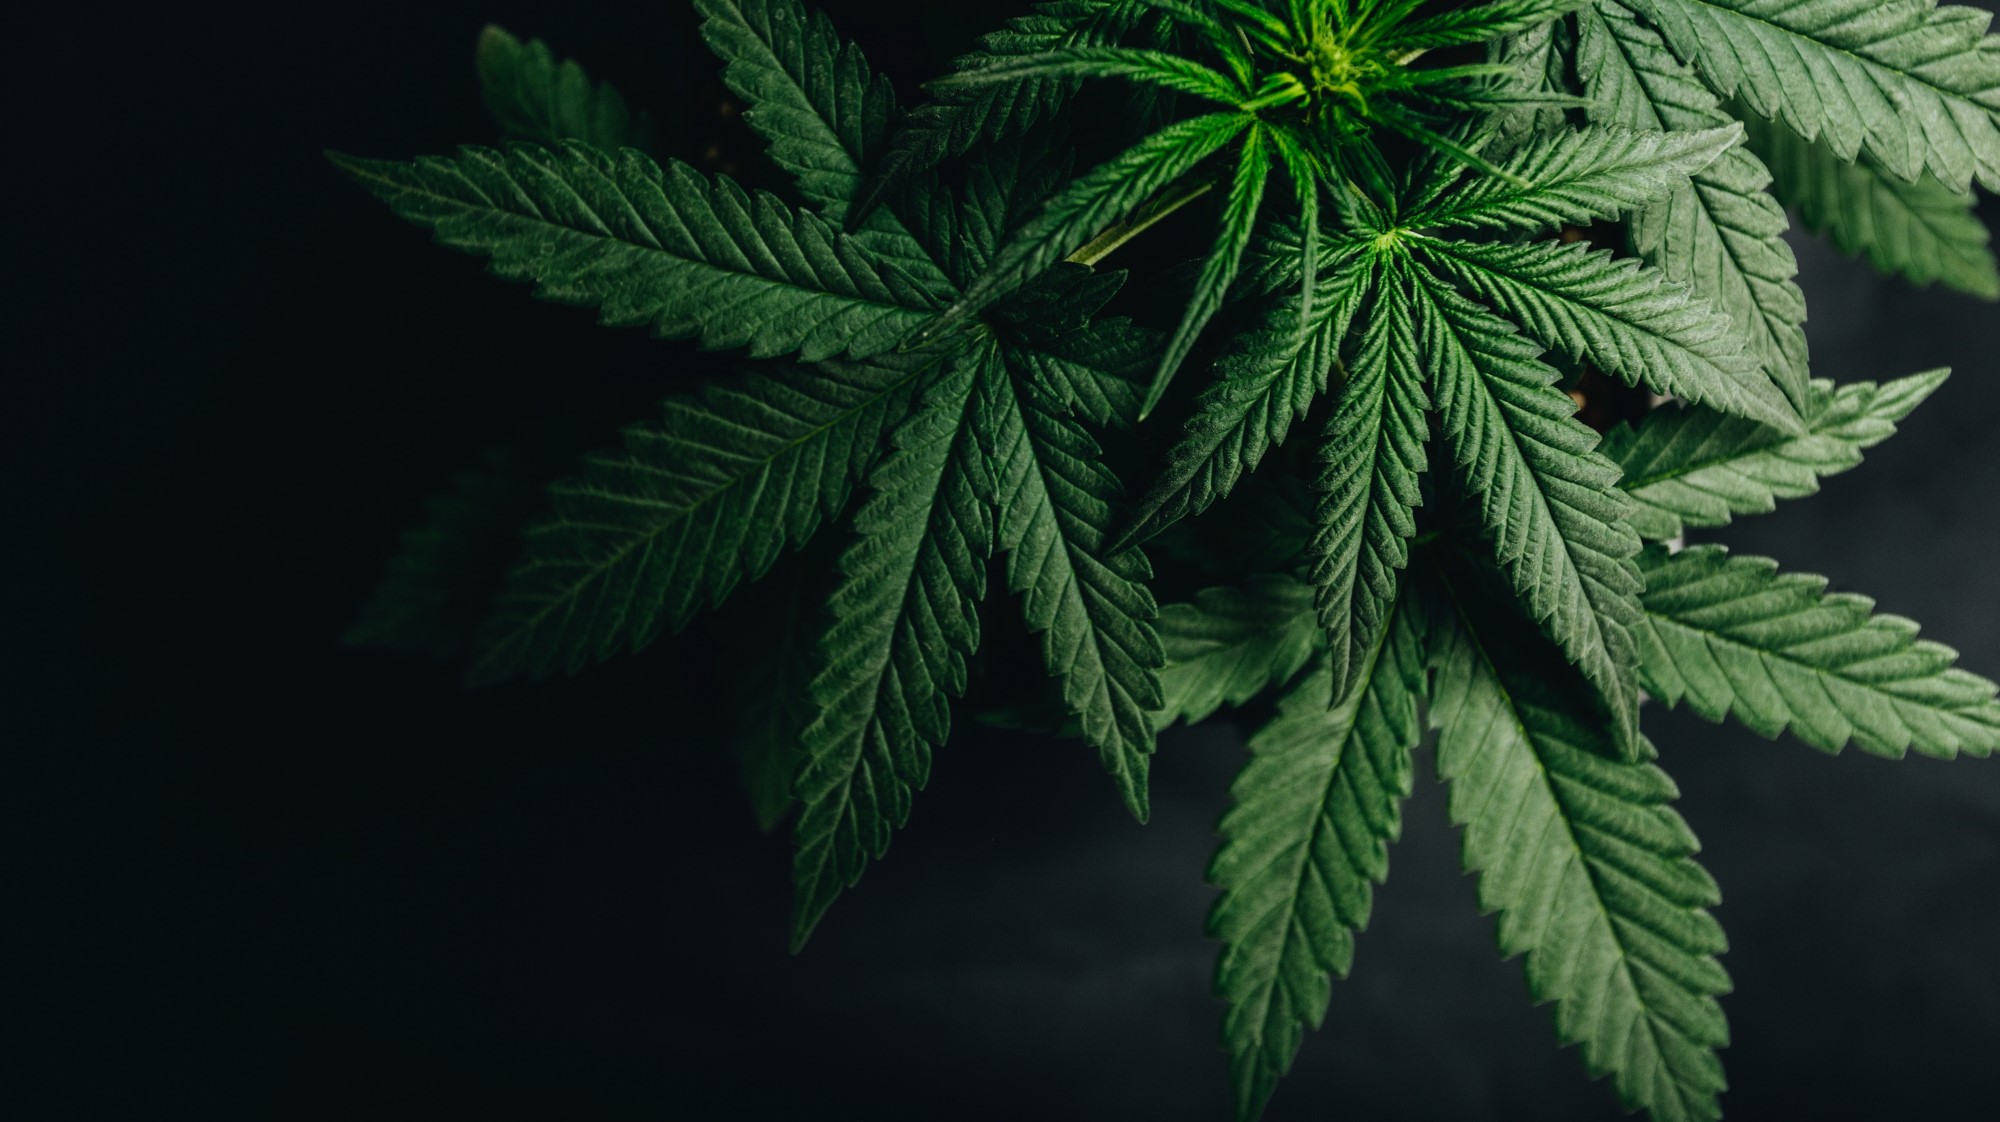 7 Key Considerations for Cannabis Start-Ups